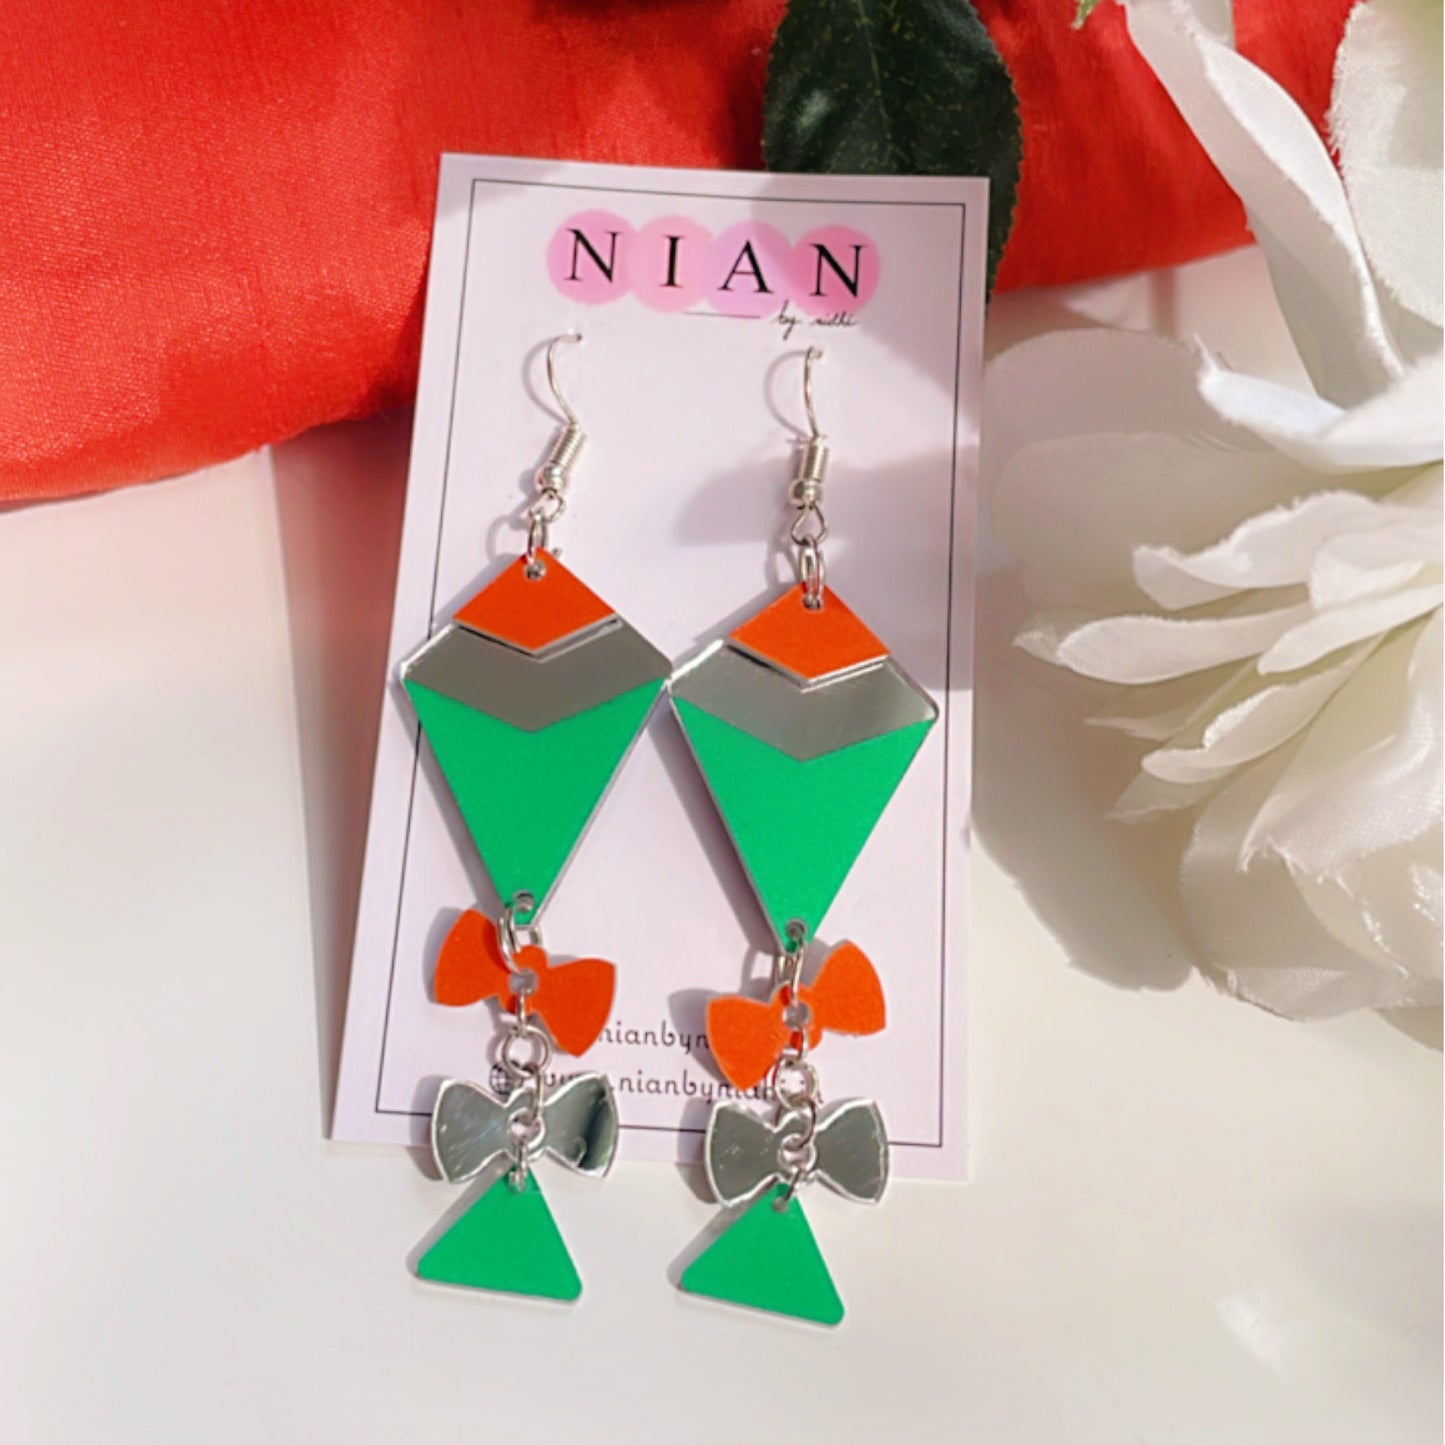 Palyful Patang Earrings - Saffron, Green and Glassy Silver - Nian by Nidhi - placed in a white background